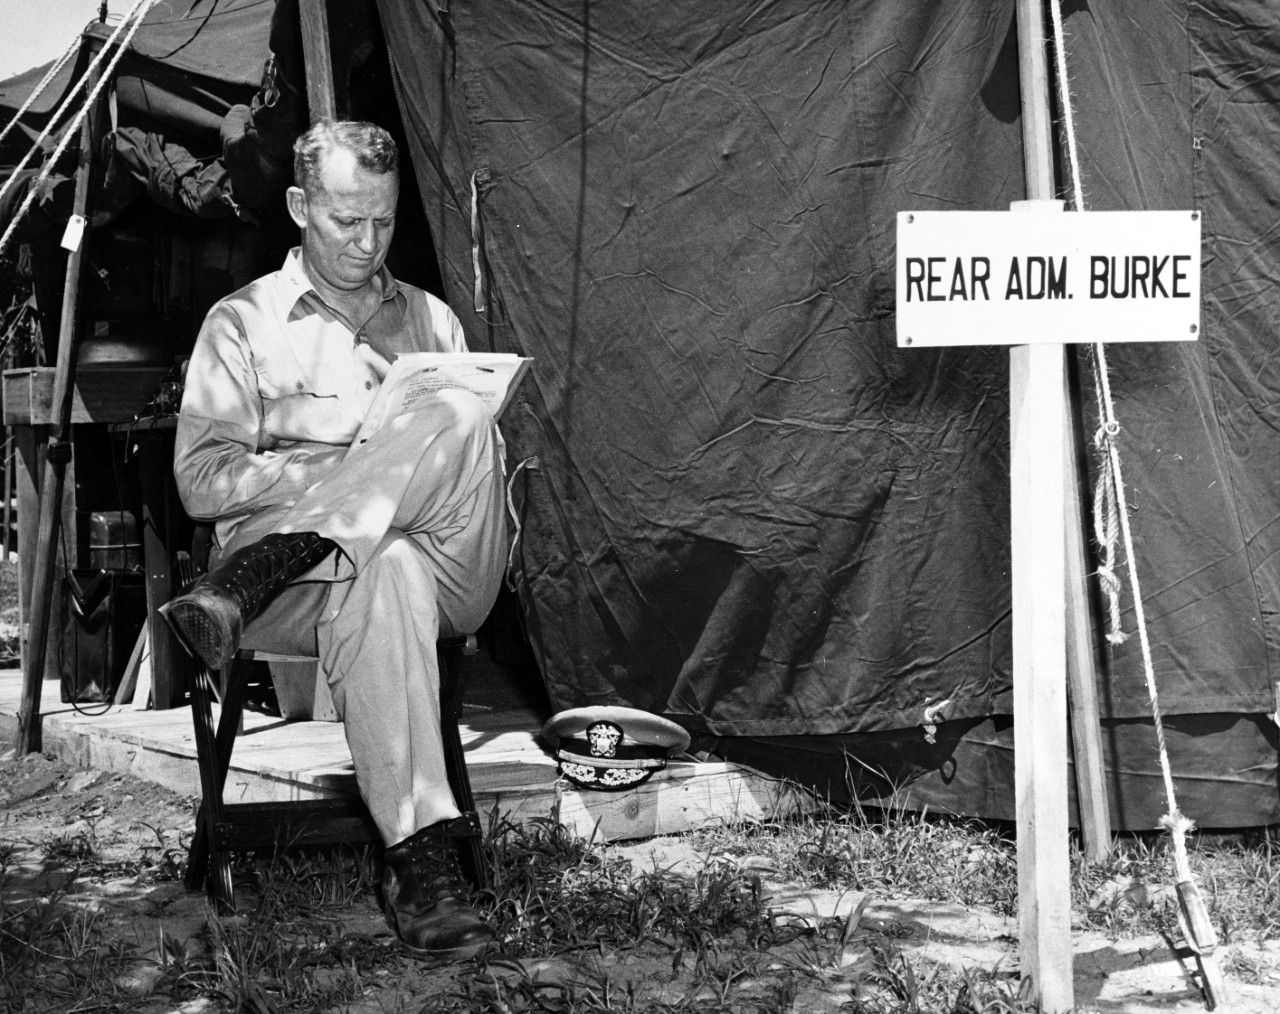 photo of man seated in front of a tent that bears the sign "Rear Adm. Burke" reading papers with a serious expression